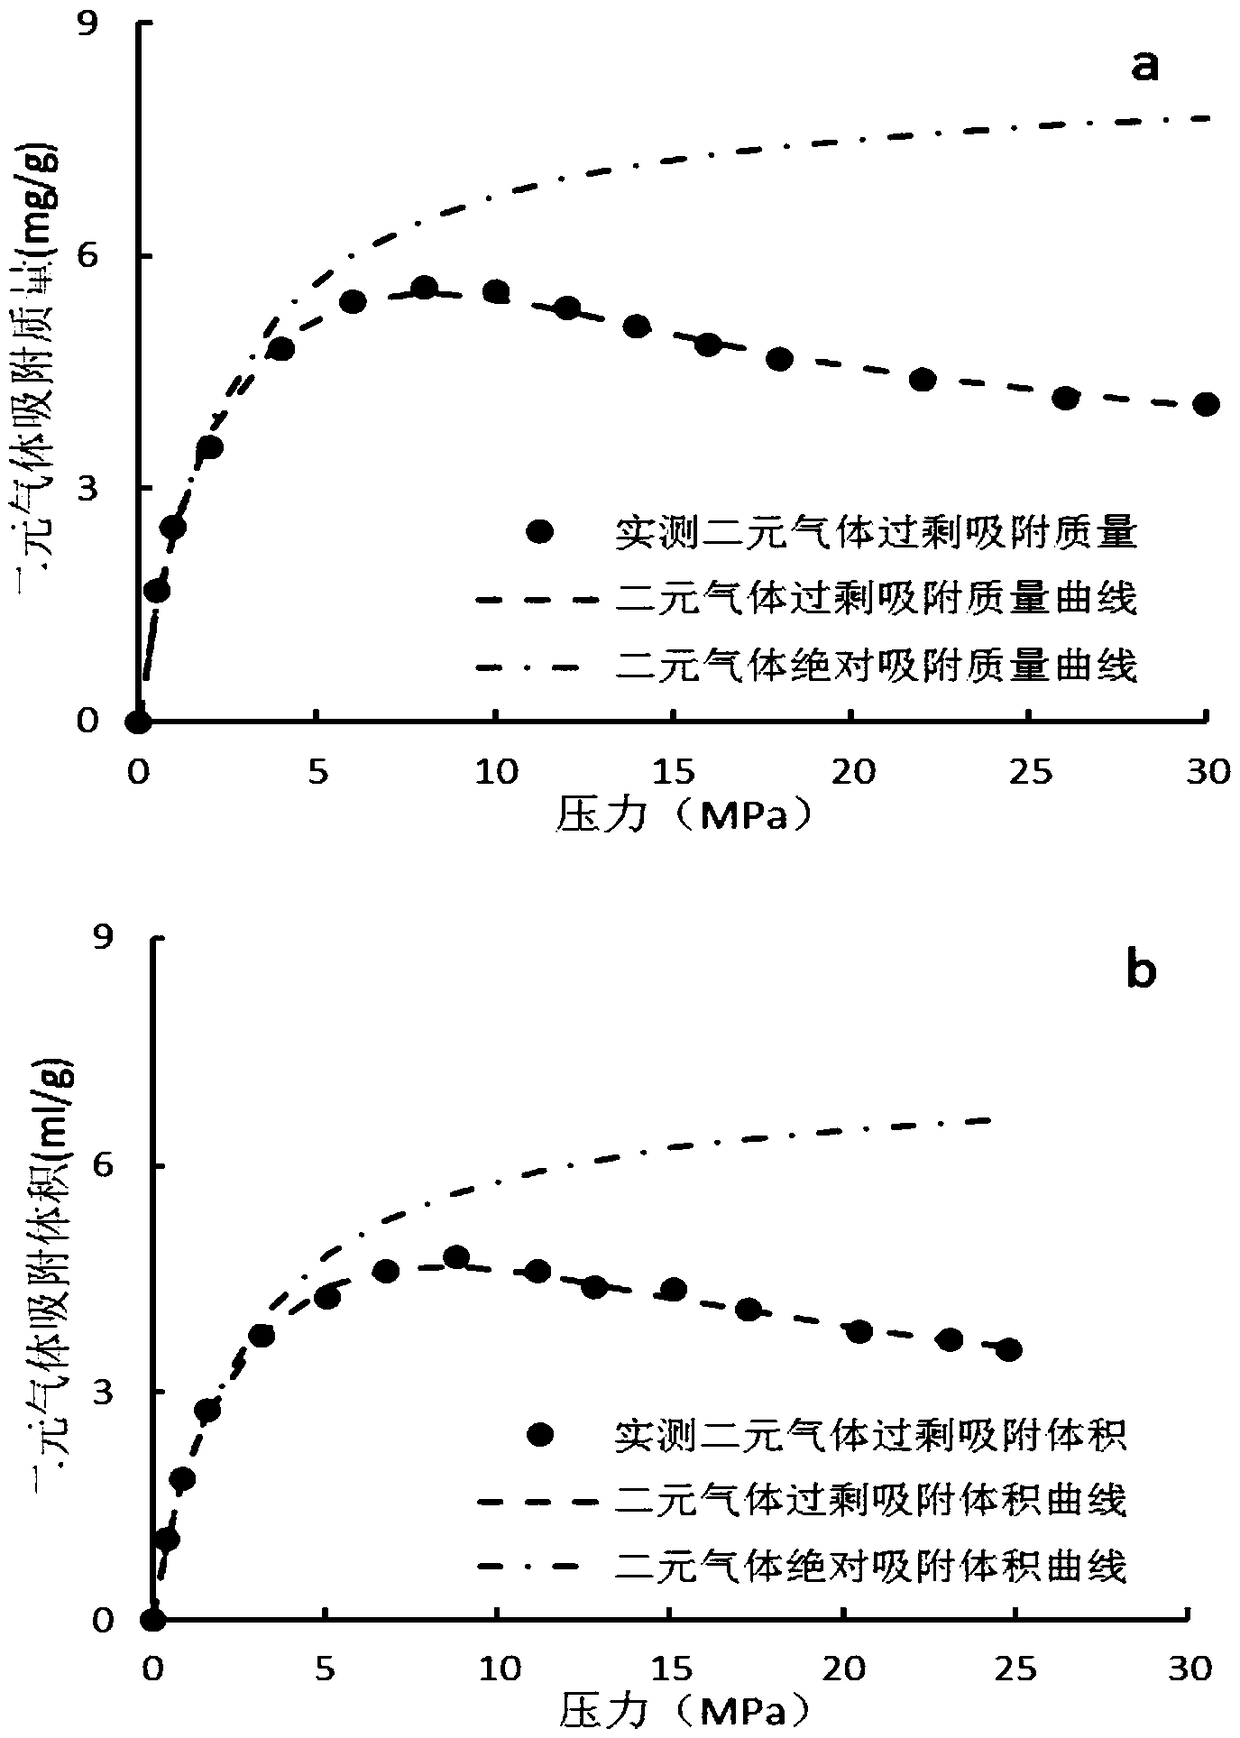 Weight method isothermal adsorption test and volumetric method isothermal adsorption test combined binary gas adsorption test method